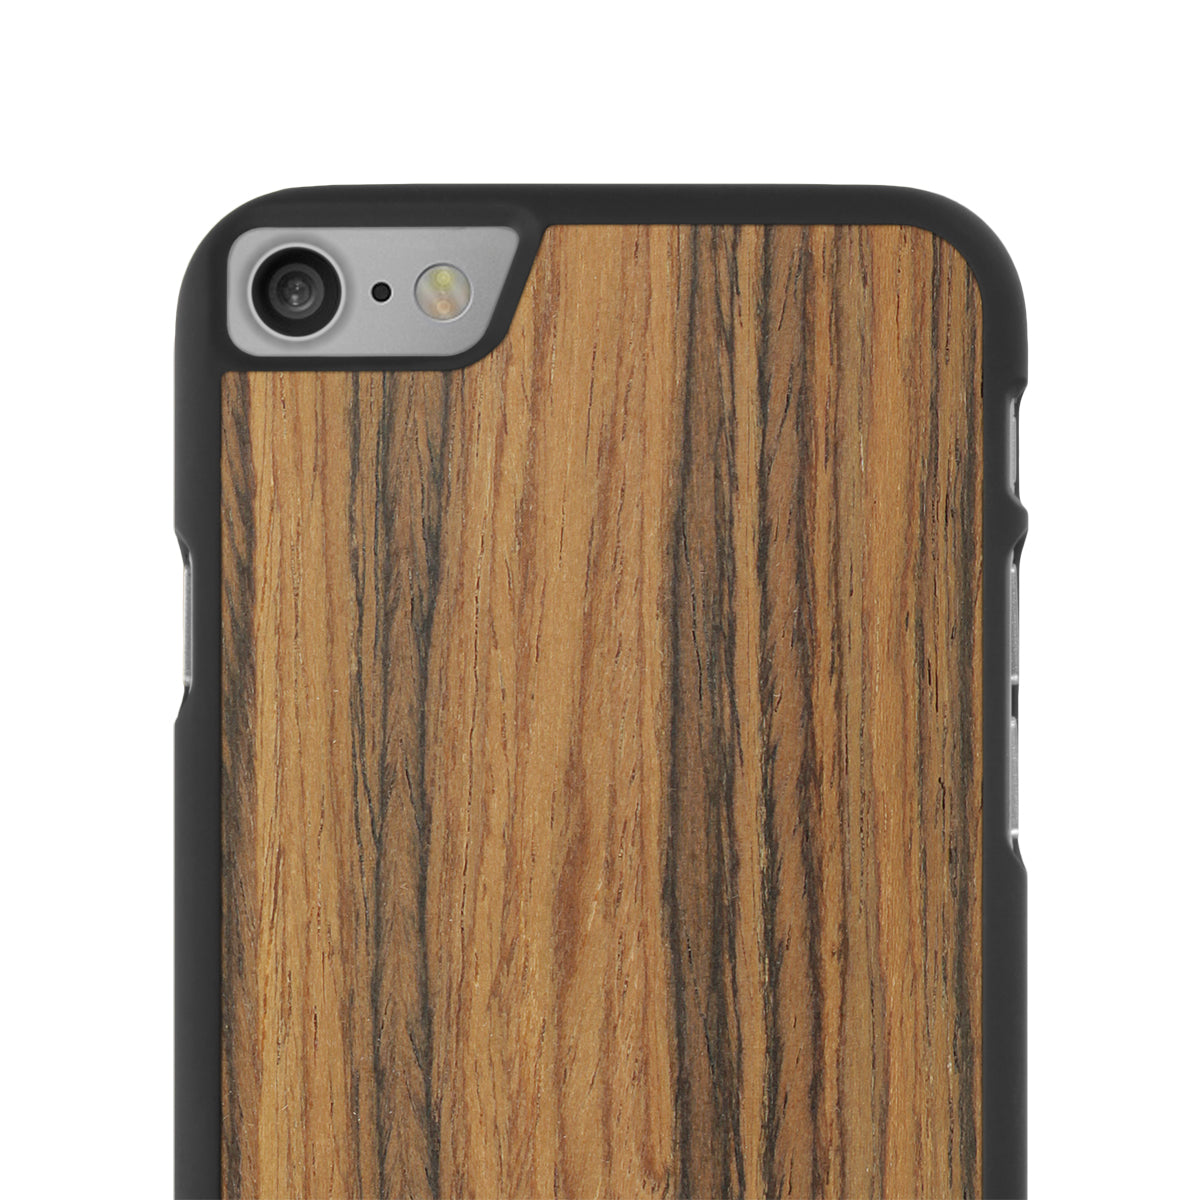 iPhone 7 — #WoodBack Snap Case